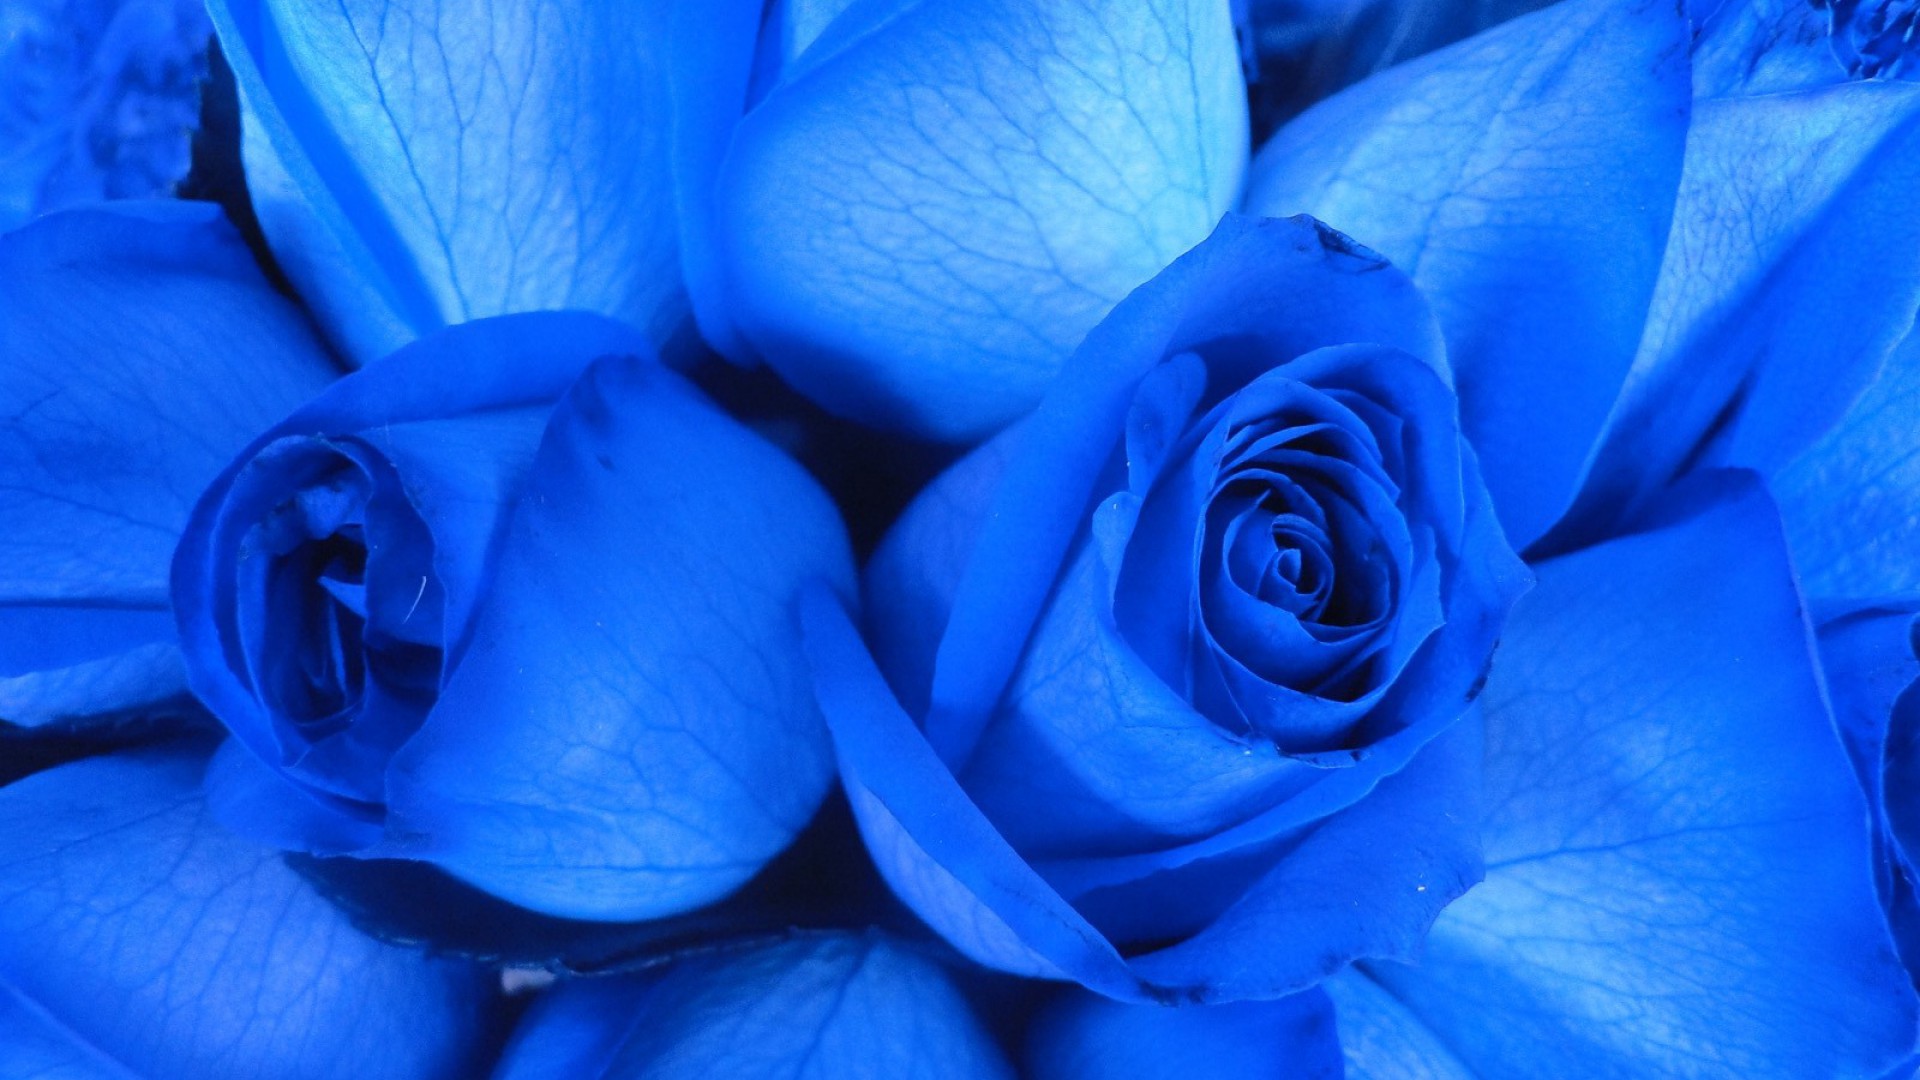 Two blue roses closeup wallpapers and images - wallpapers, pictures ...